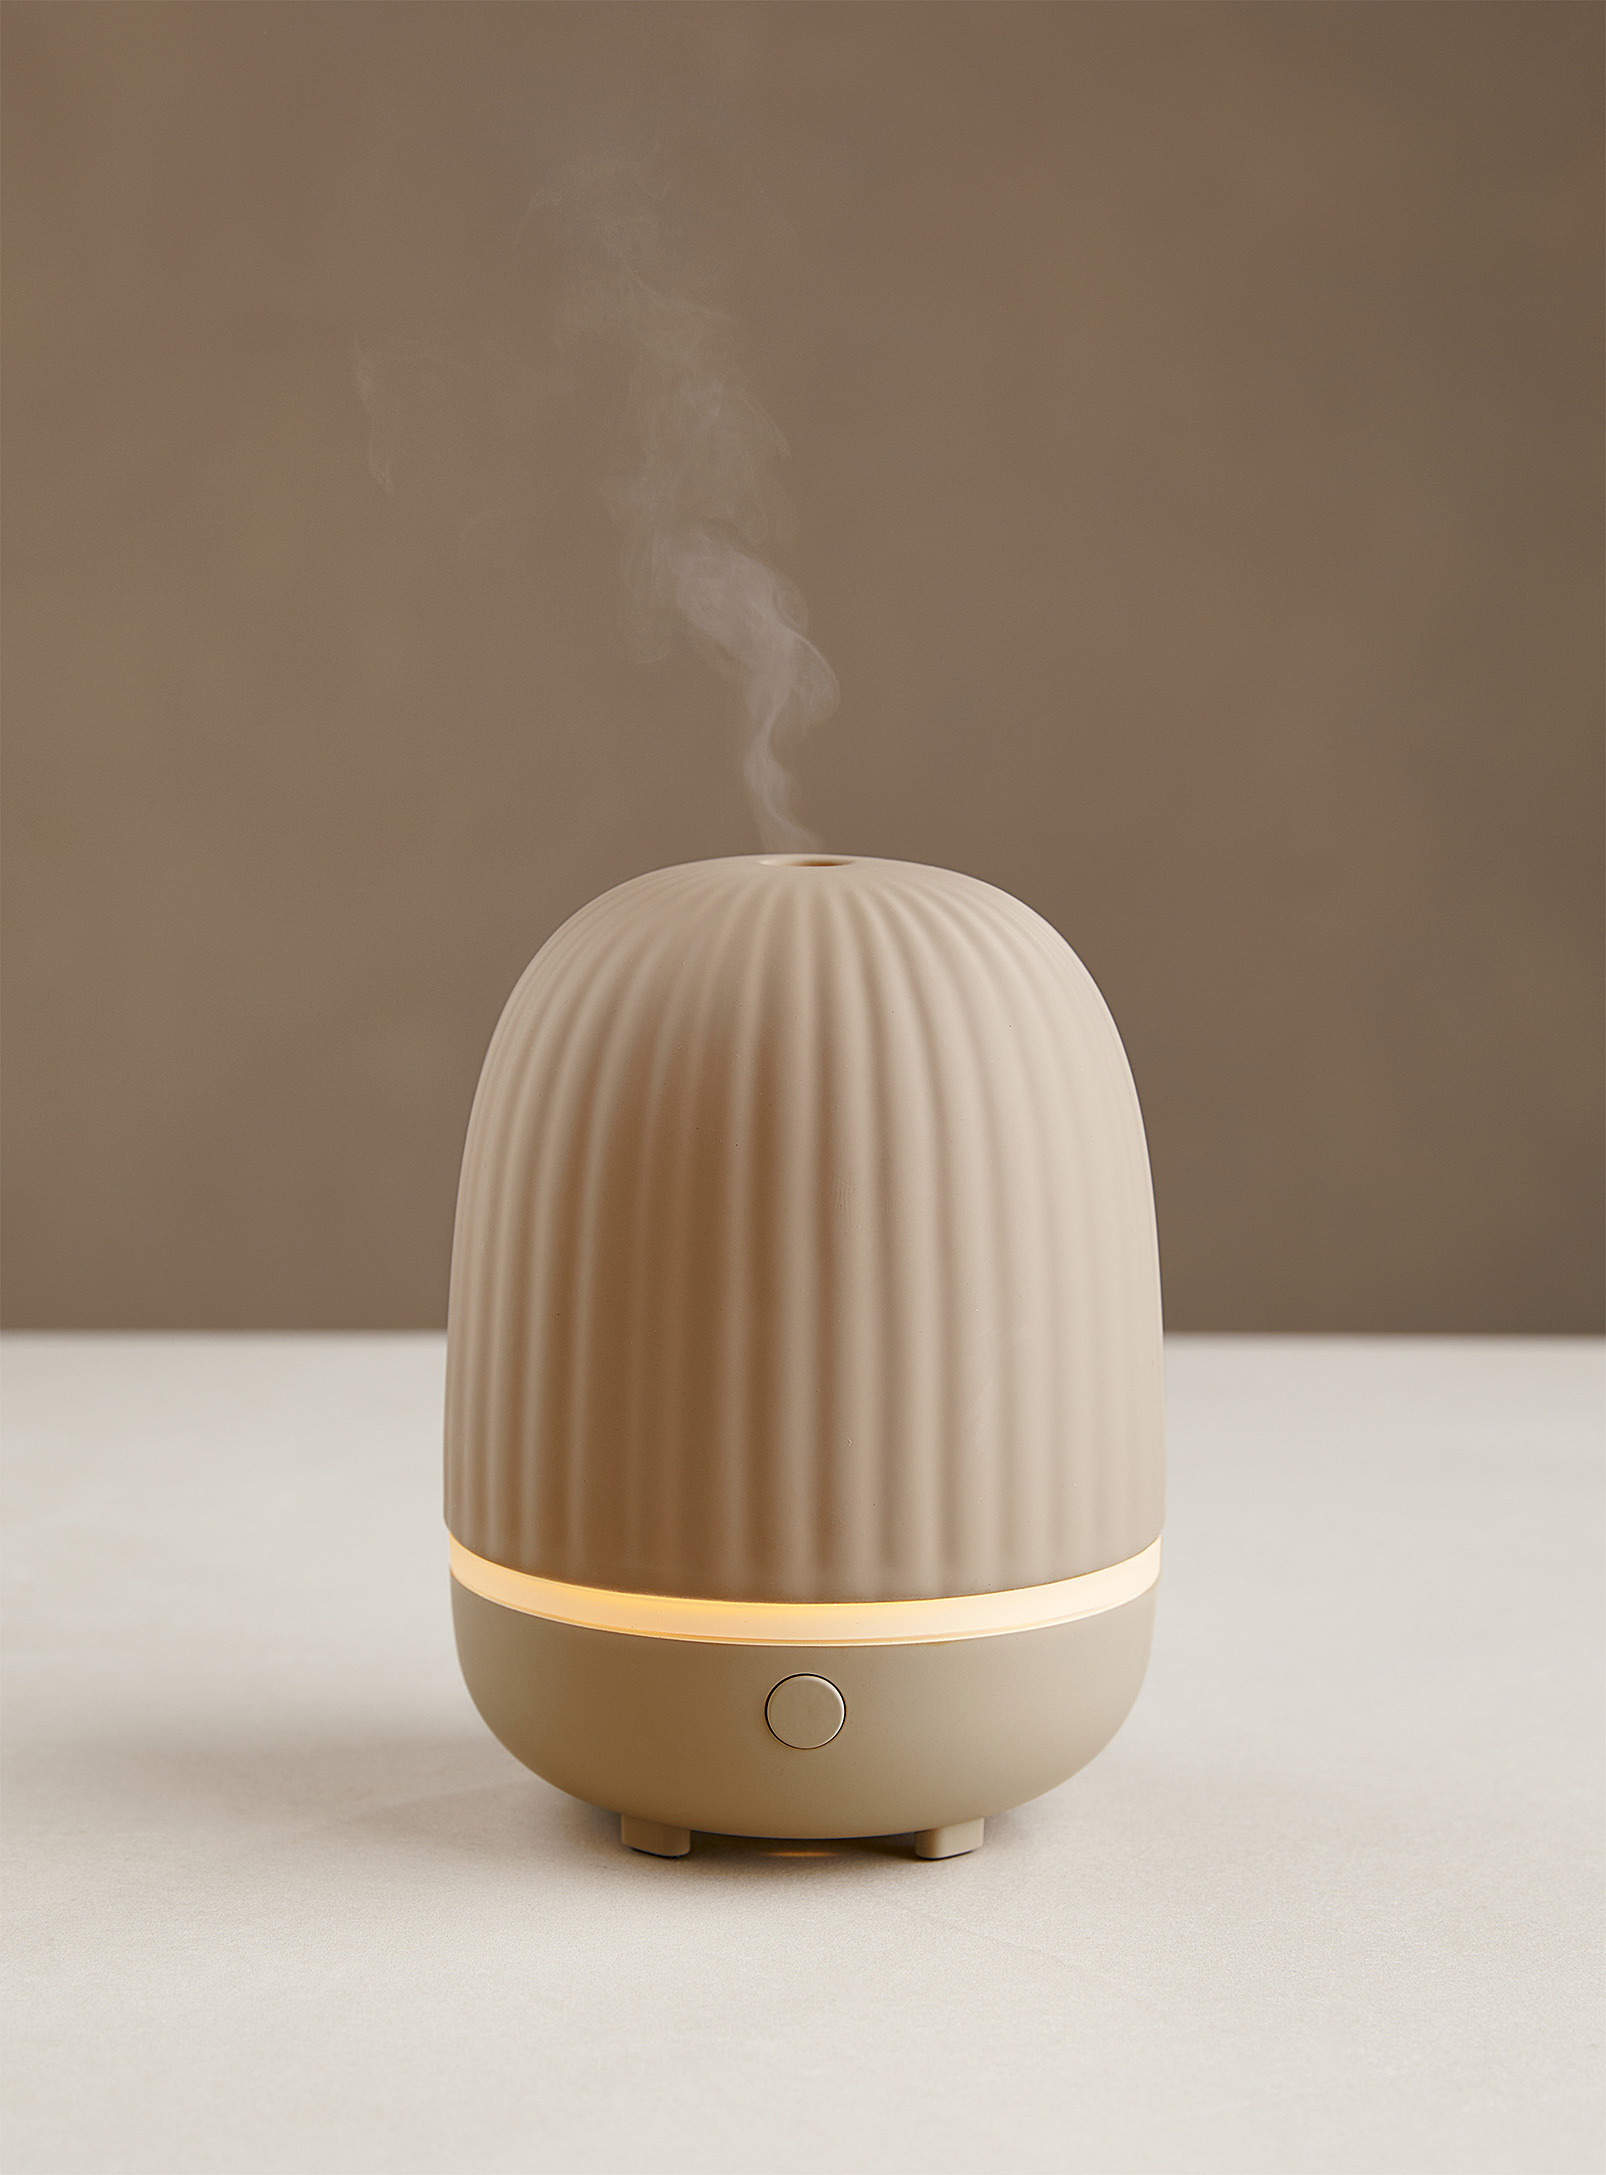 Simons Maison Latte Essential Oil Diffuser In Taupe